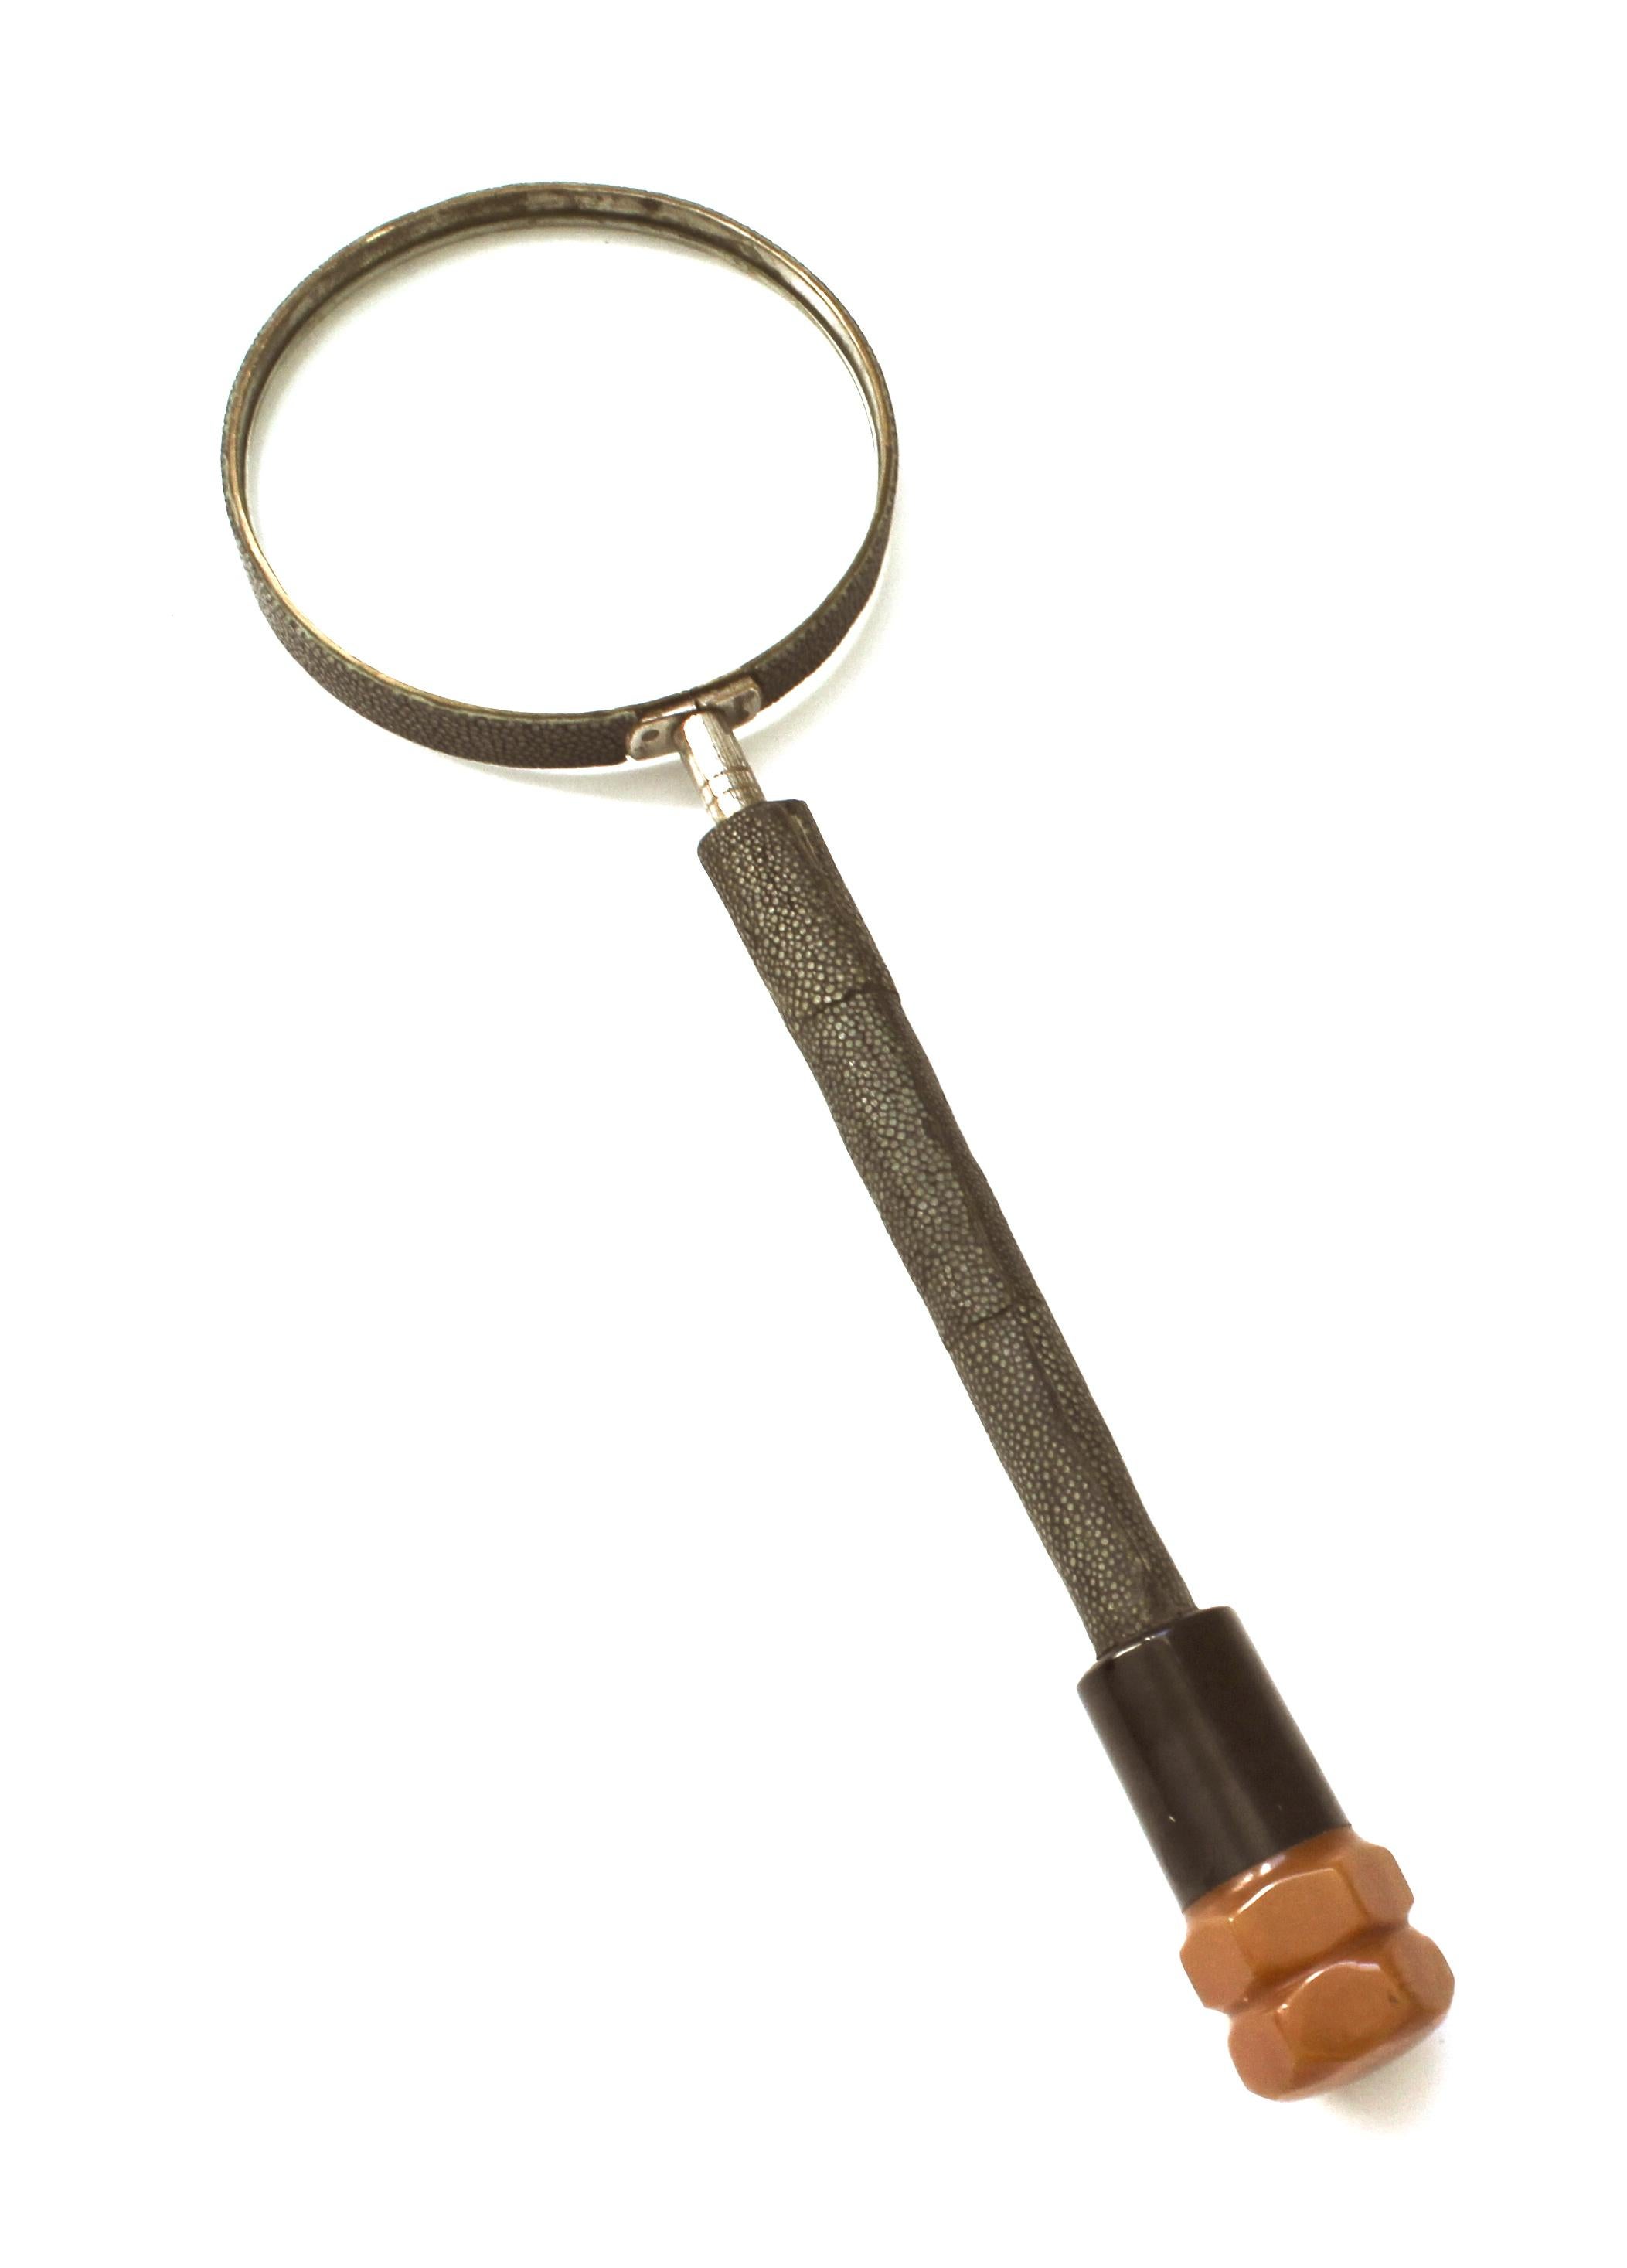 This stylish English Art Deco magnifying glass was acquired in London and it dates to the 1920s-1930s.

The piece is fabricated in shagreen and bakelite.